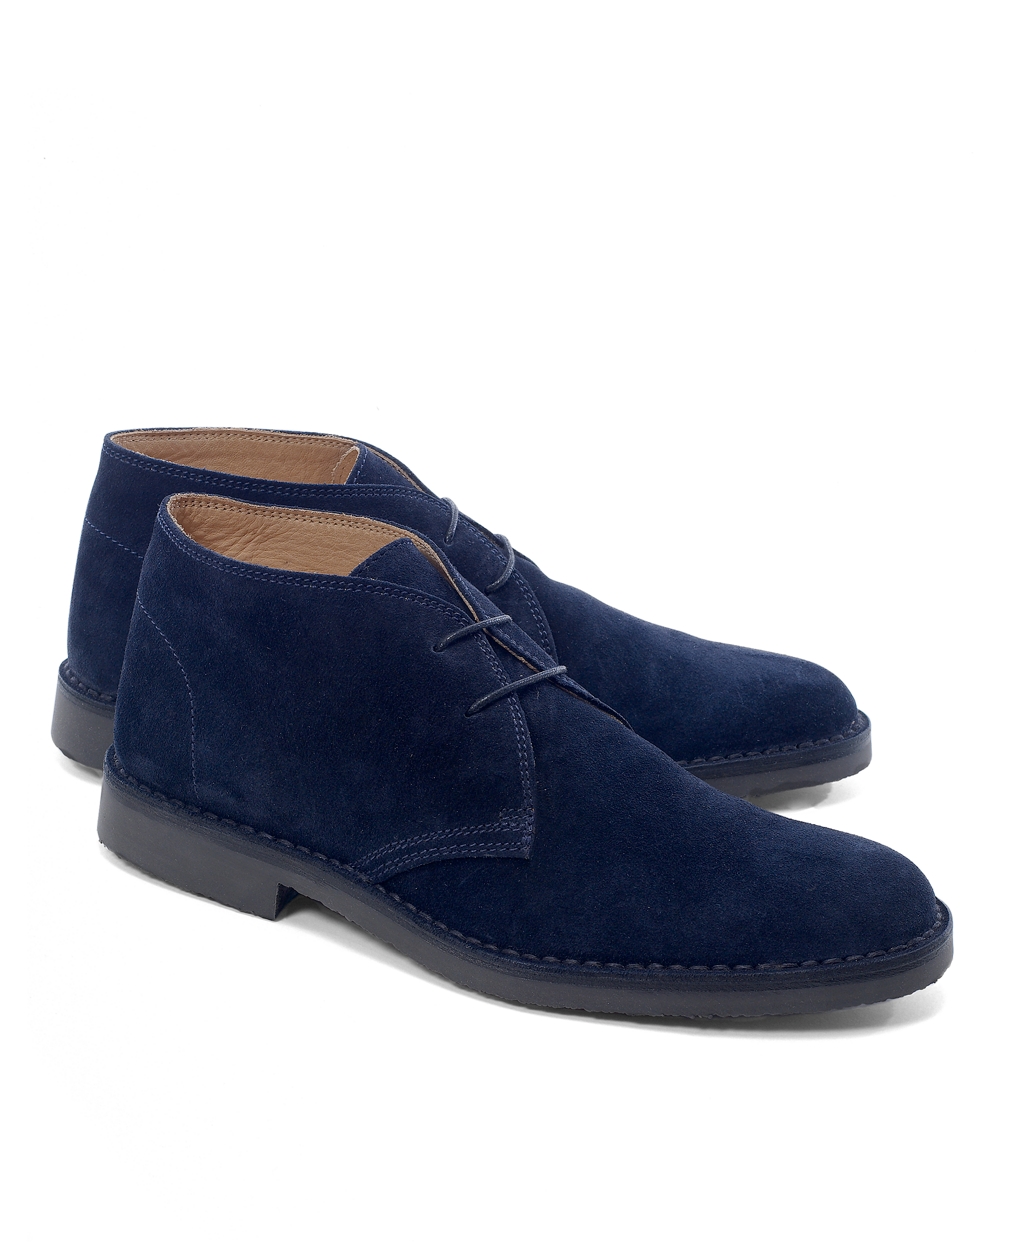 Lyst - Brooks brothers Peal & Co.® Chukka Field Boots in Blue for Men